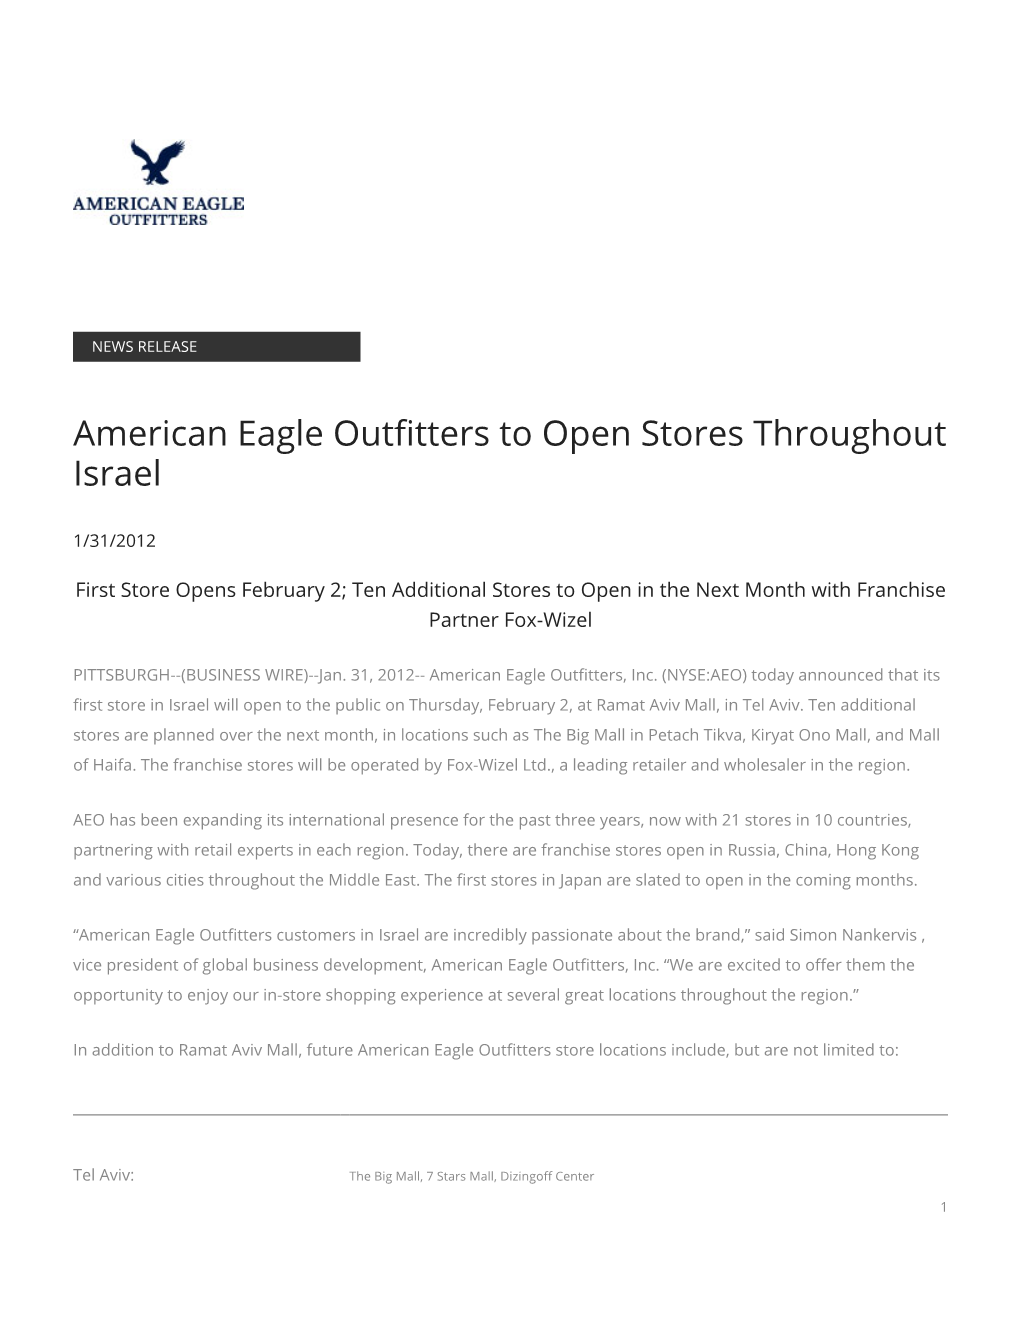 American Eagle Outfitters to Open Stores Throughout Israel